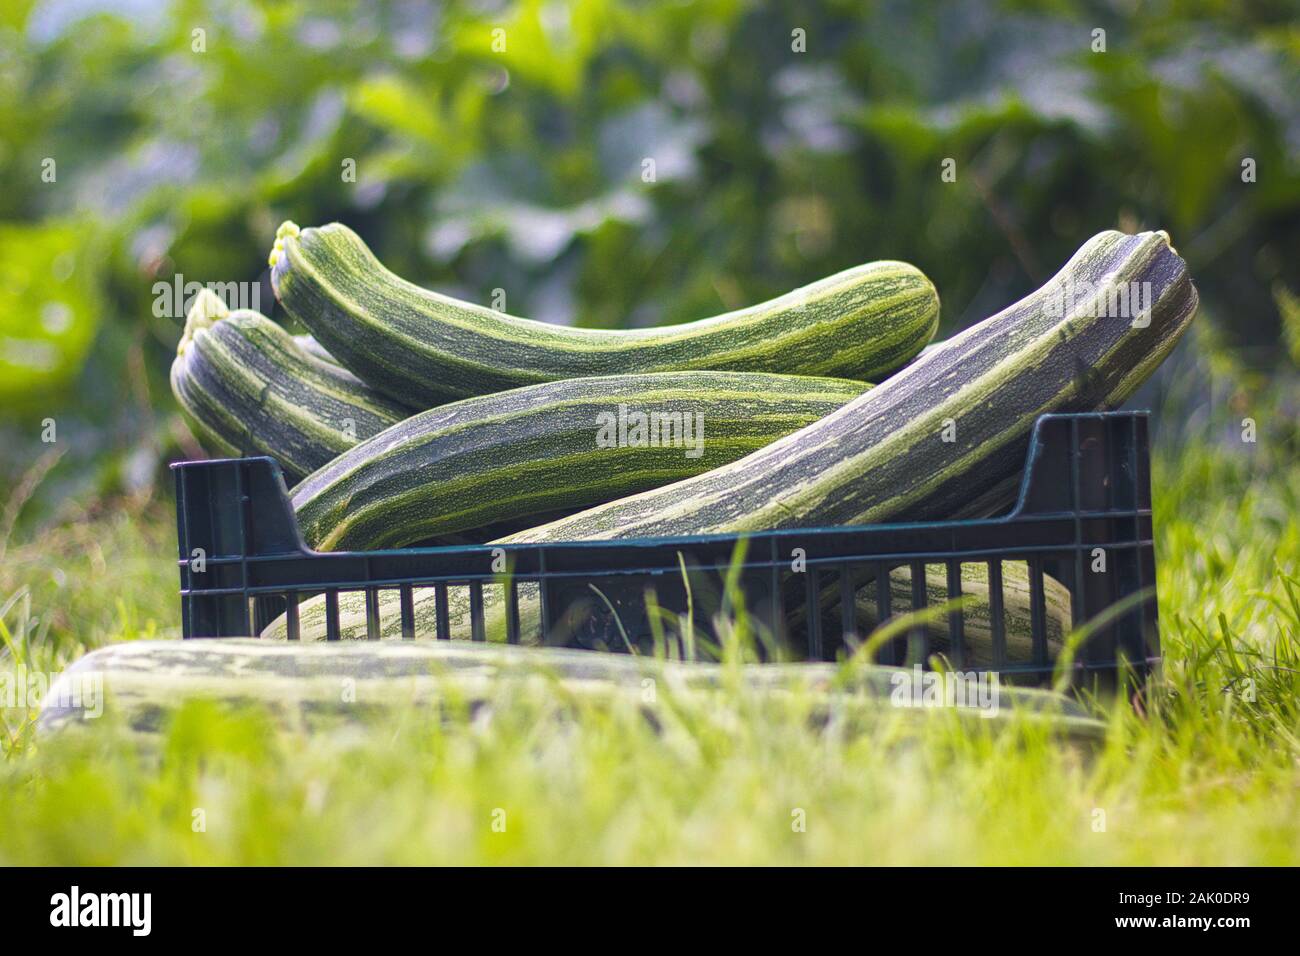 Zucchini harvest - courgettes in a box, in the grass in the garden Stock Photo